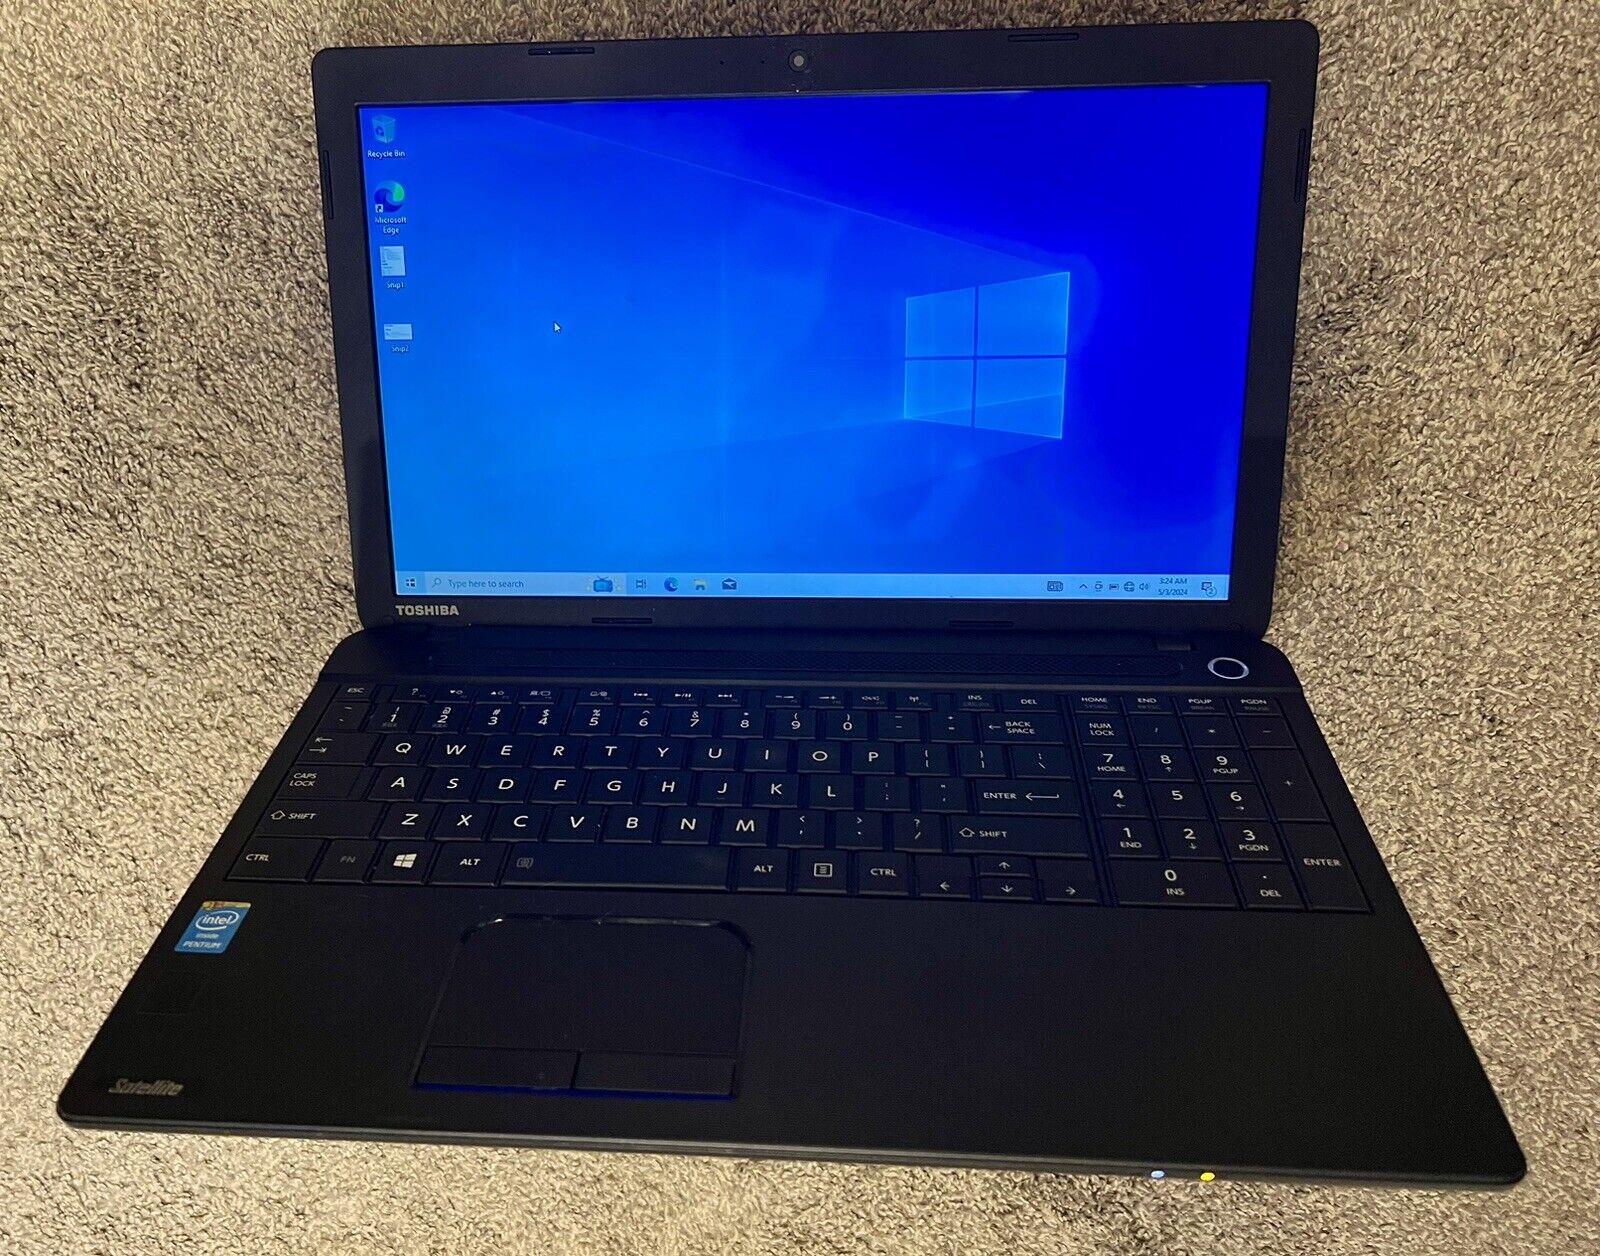 TOSHIBA Satellite C55-A5302 Laptop with SSD, 8GB RAM and Windows 10 Home Preload